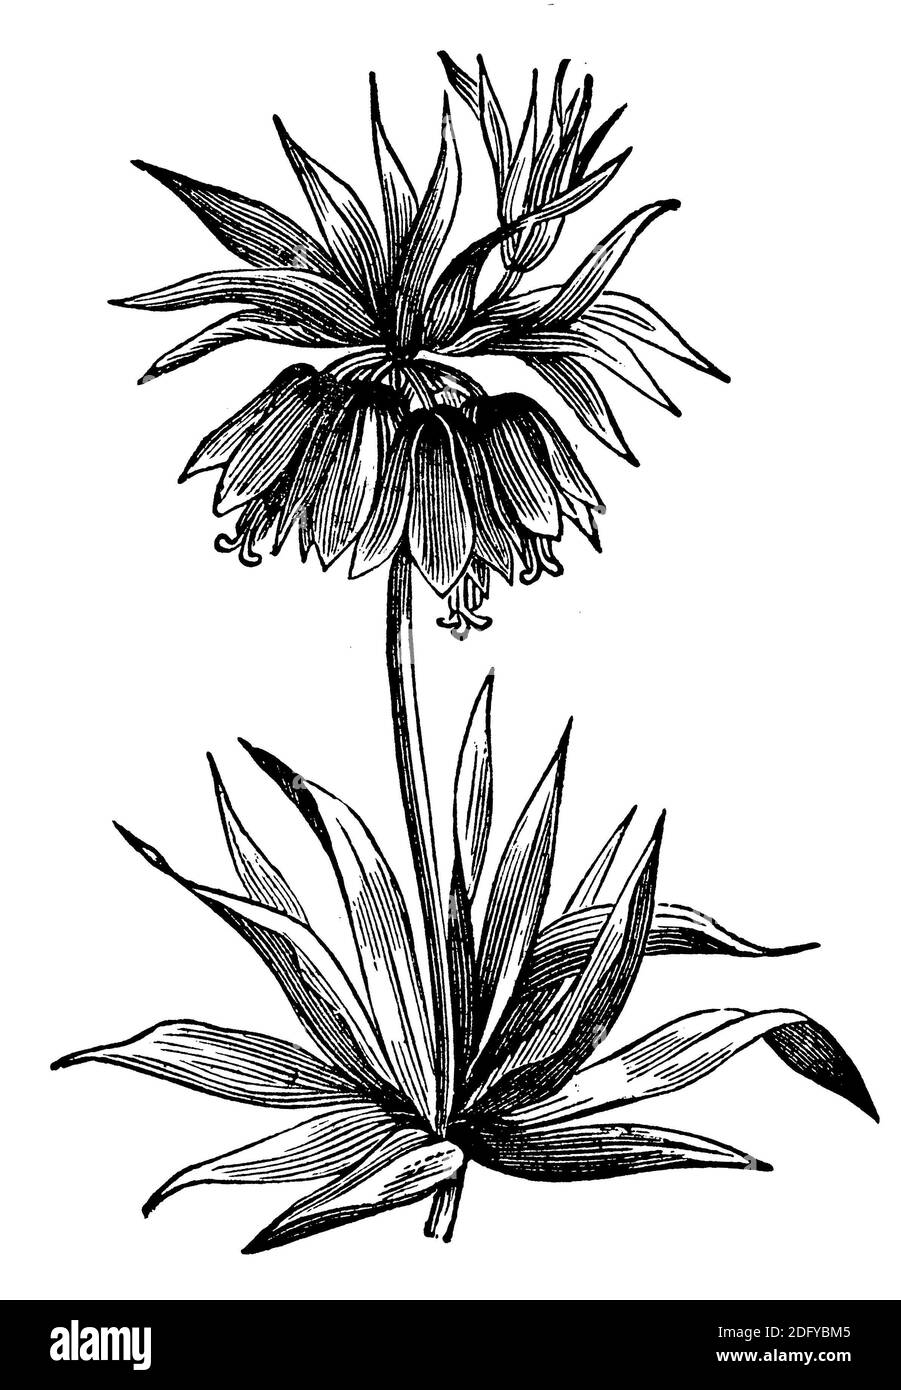 crown imperial, imperial fritillary or Kaiser's crown / Fritillaria imperialis / Kaiserkrone (encyclopedia, 1900) Stock Photo